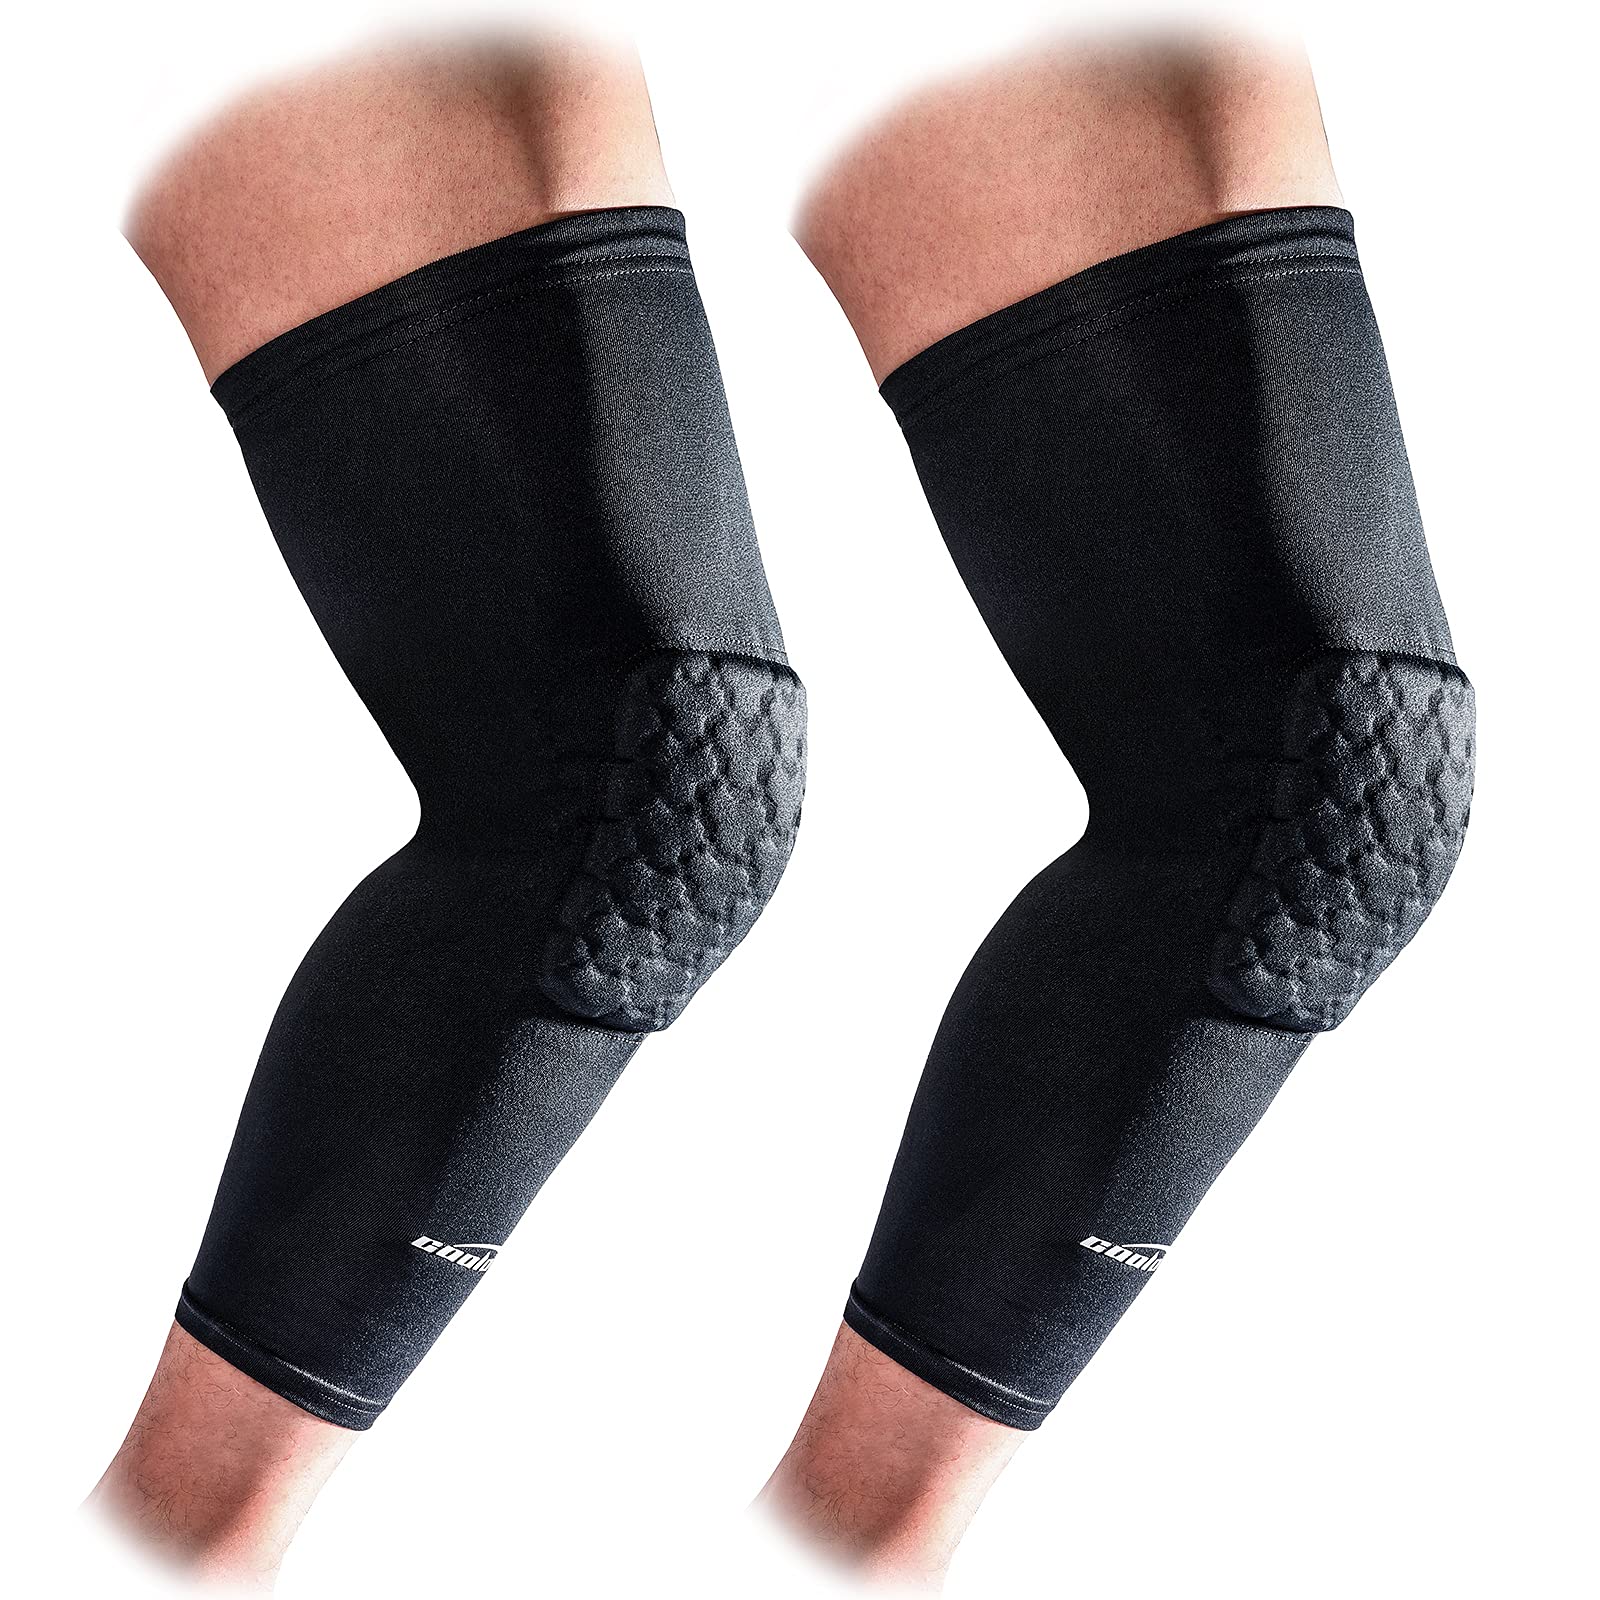 Top 7 Best Basketball Knee Pads in 2021 (Full Review)